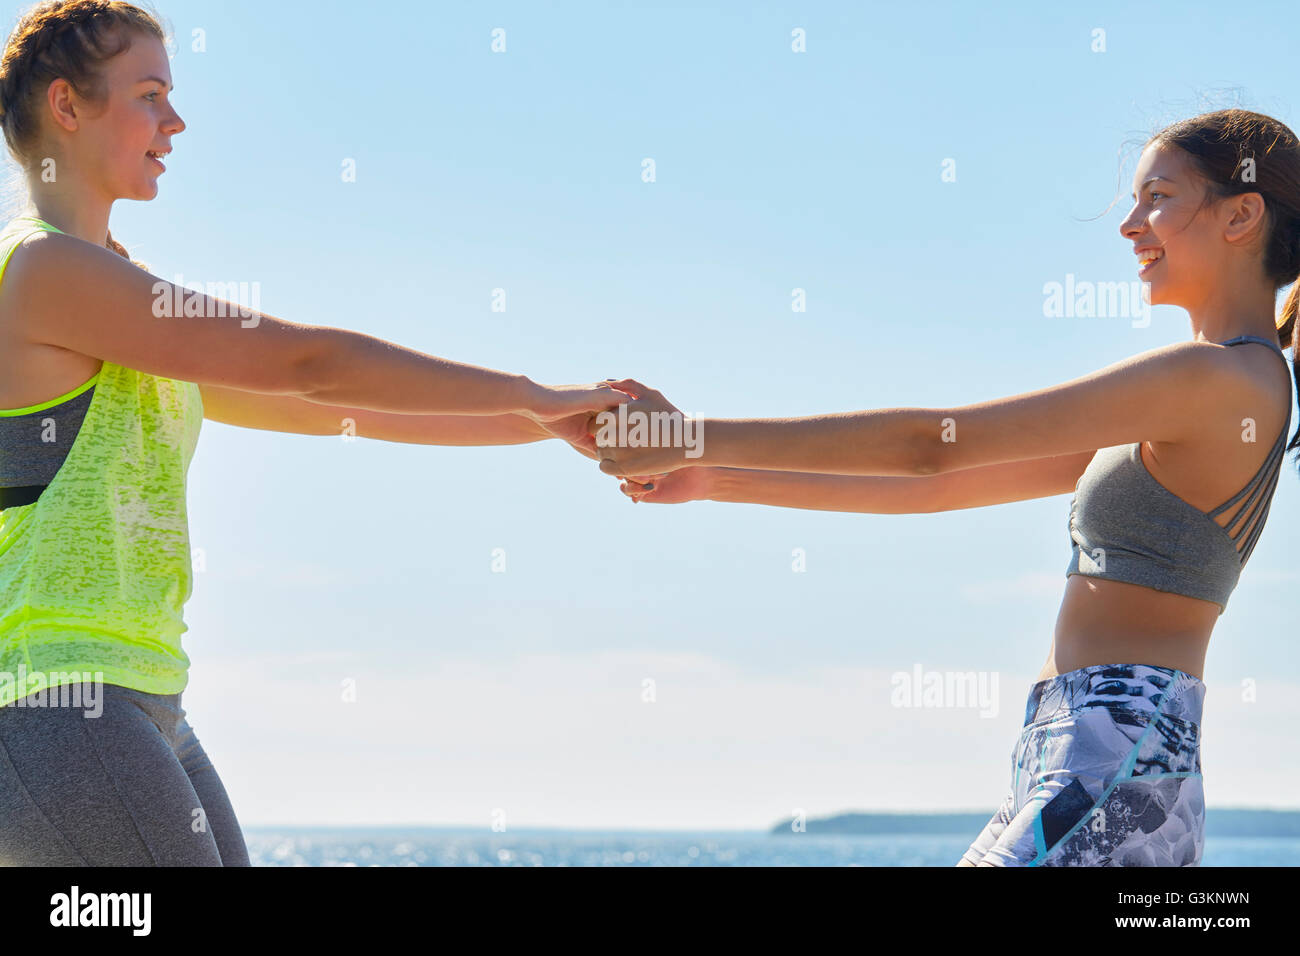 Women wearing sports clothes face to face holding hands smiling Stock Photo